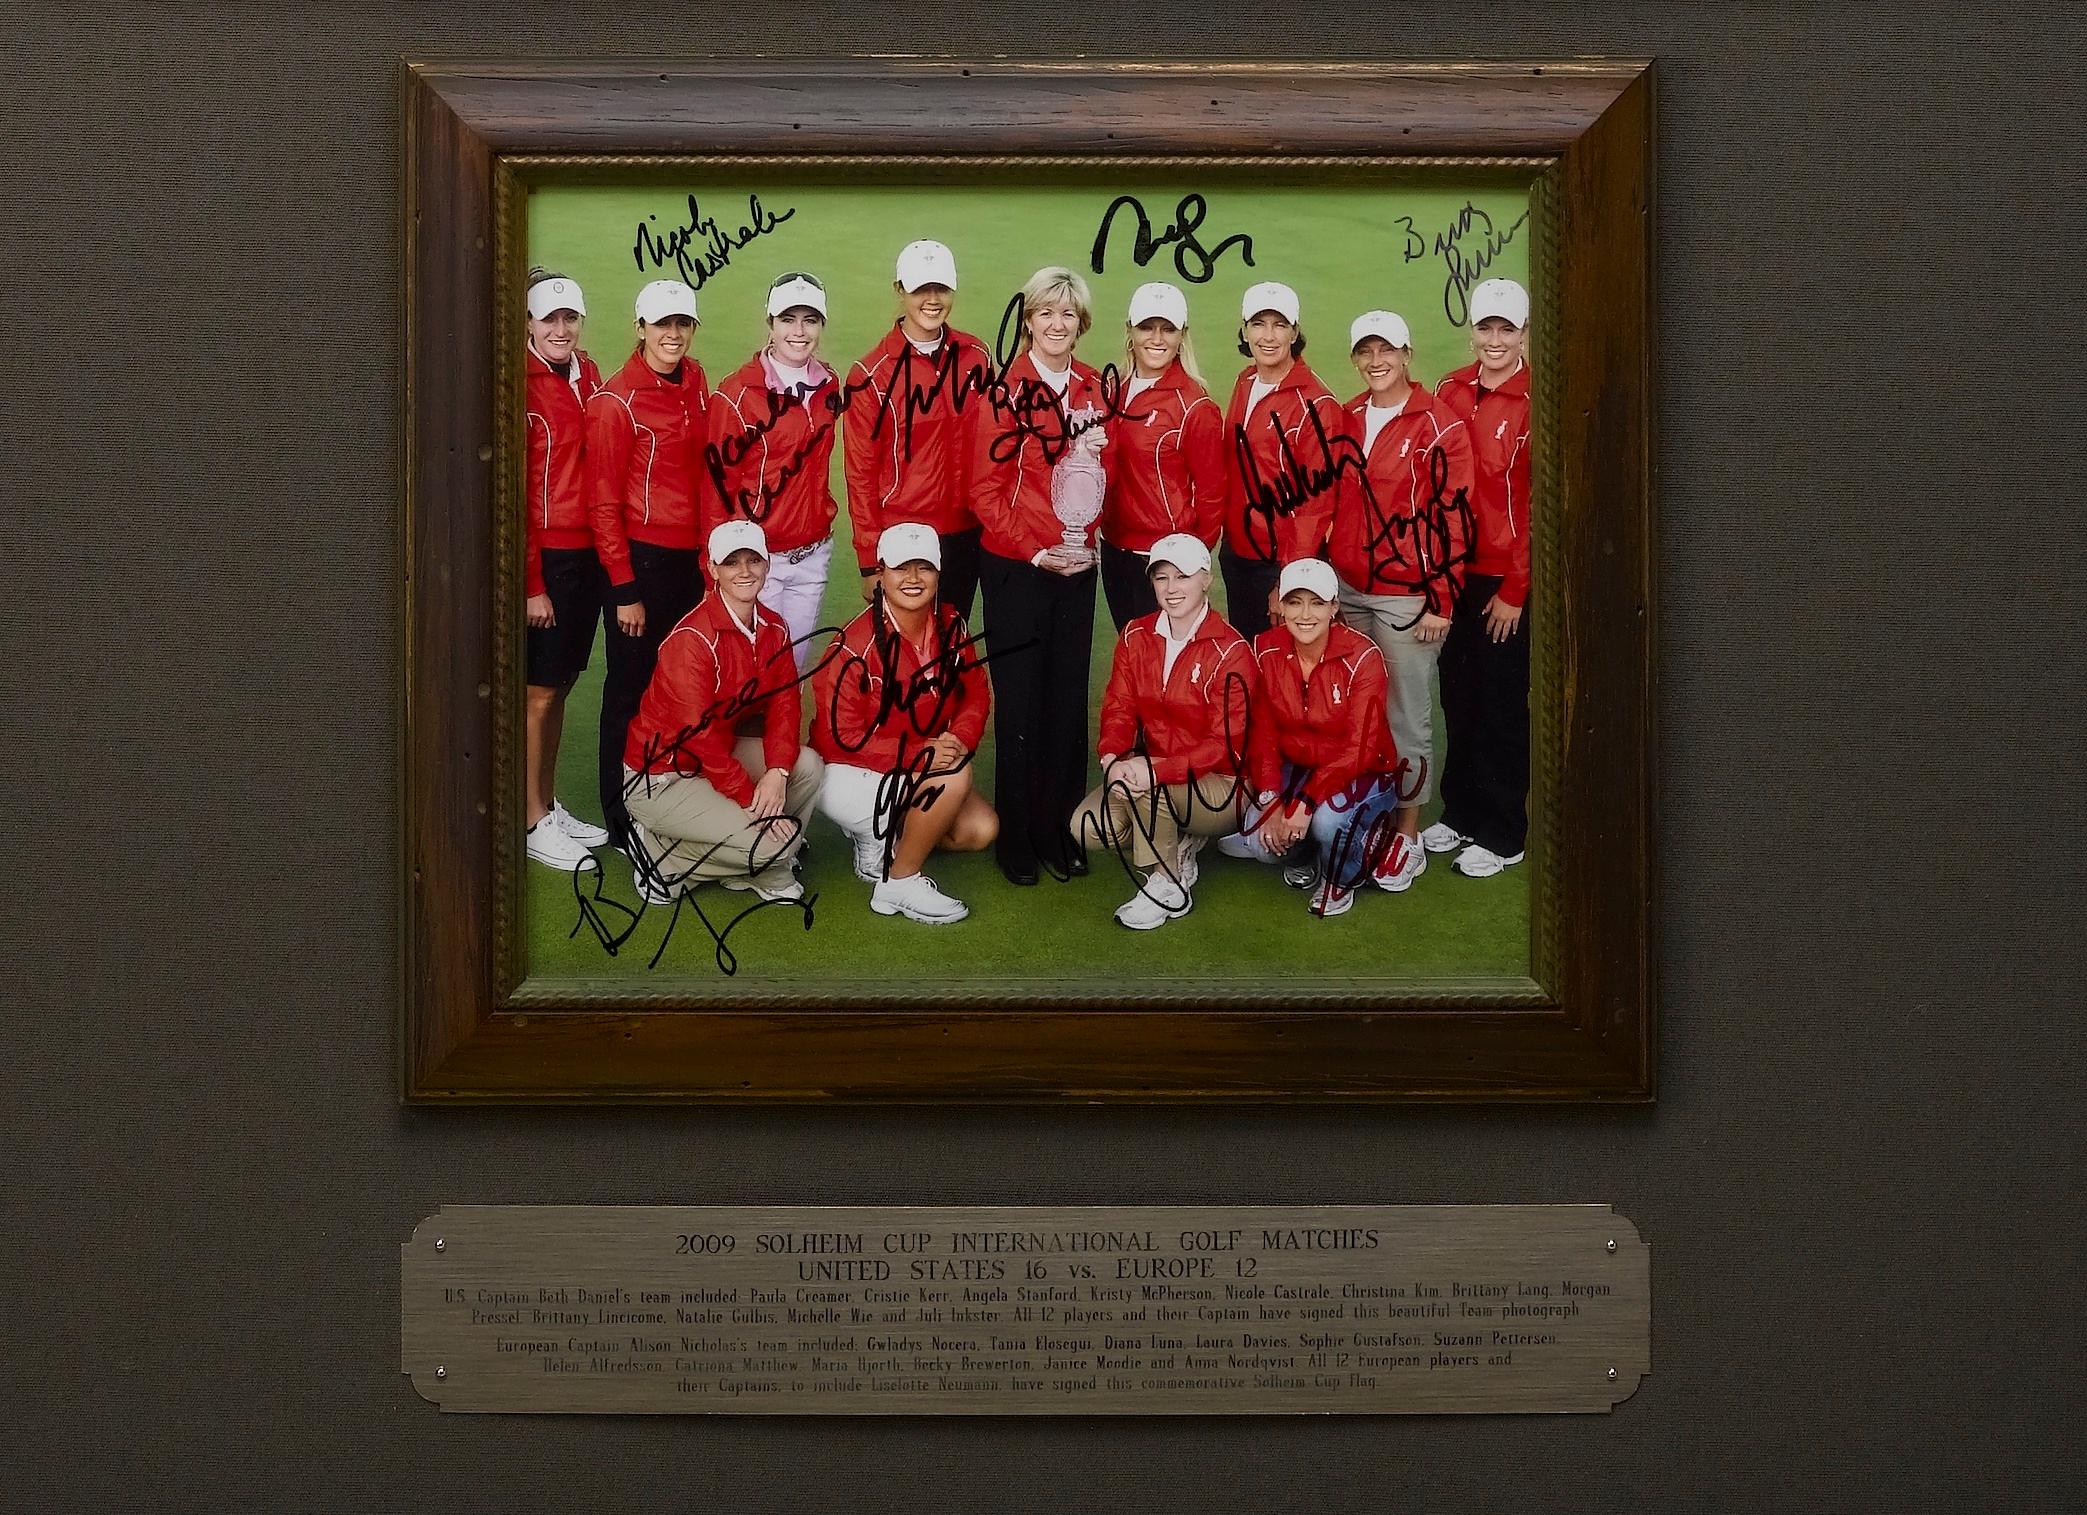 Solheim Cup Matches U.S. & European Team Signed Photo & Flag, 2009 In Good Condition For Sale In Colorado Springs, CO